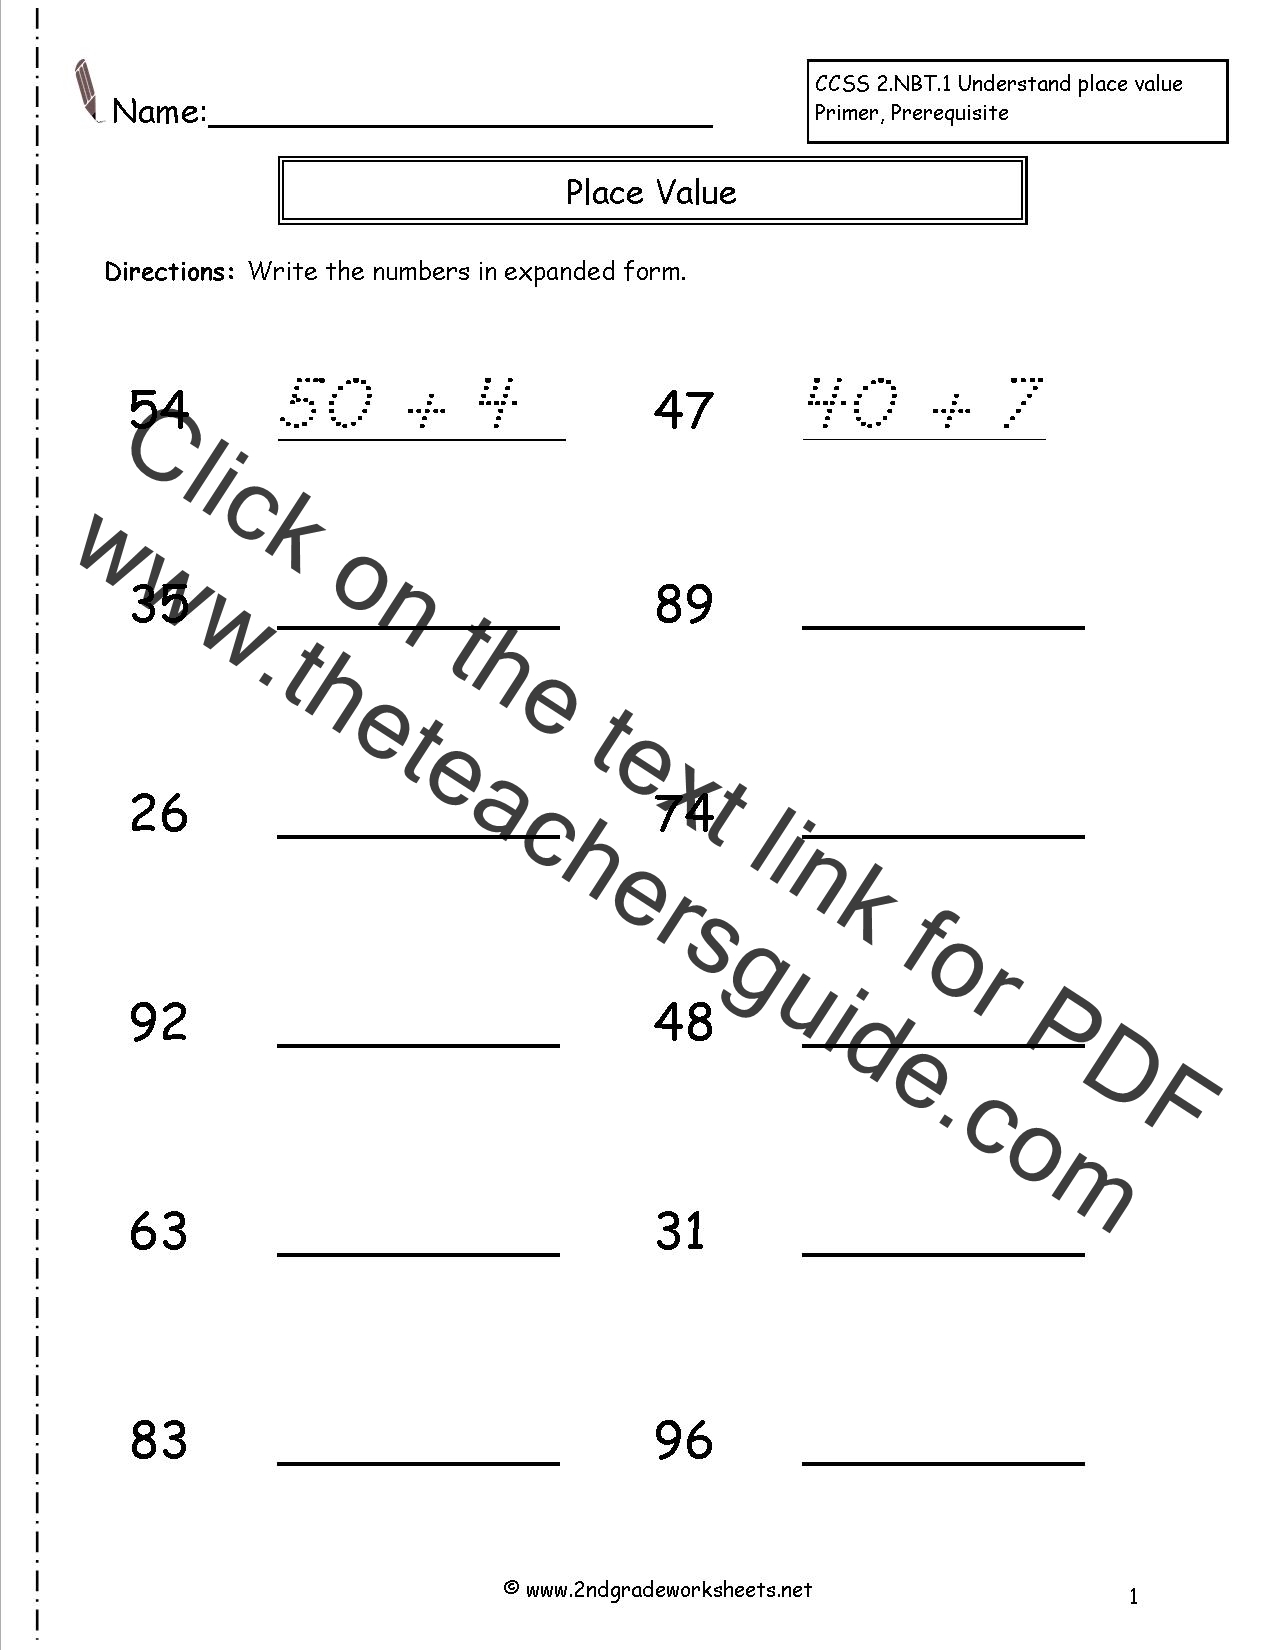 Common Core Math Expanded Form Worksheets - 2nd grade math common core